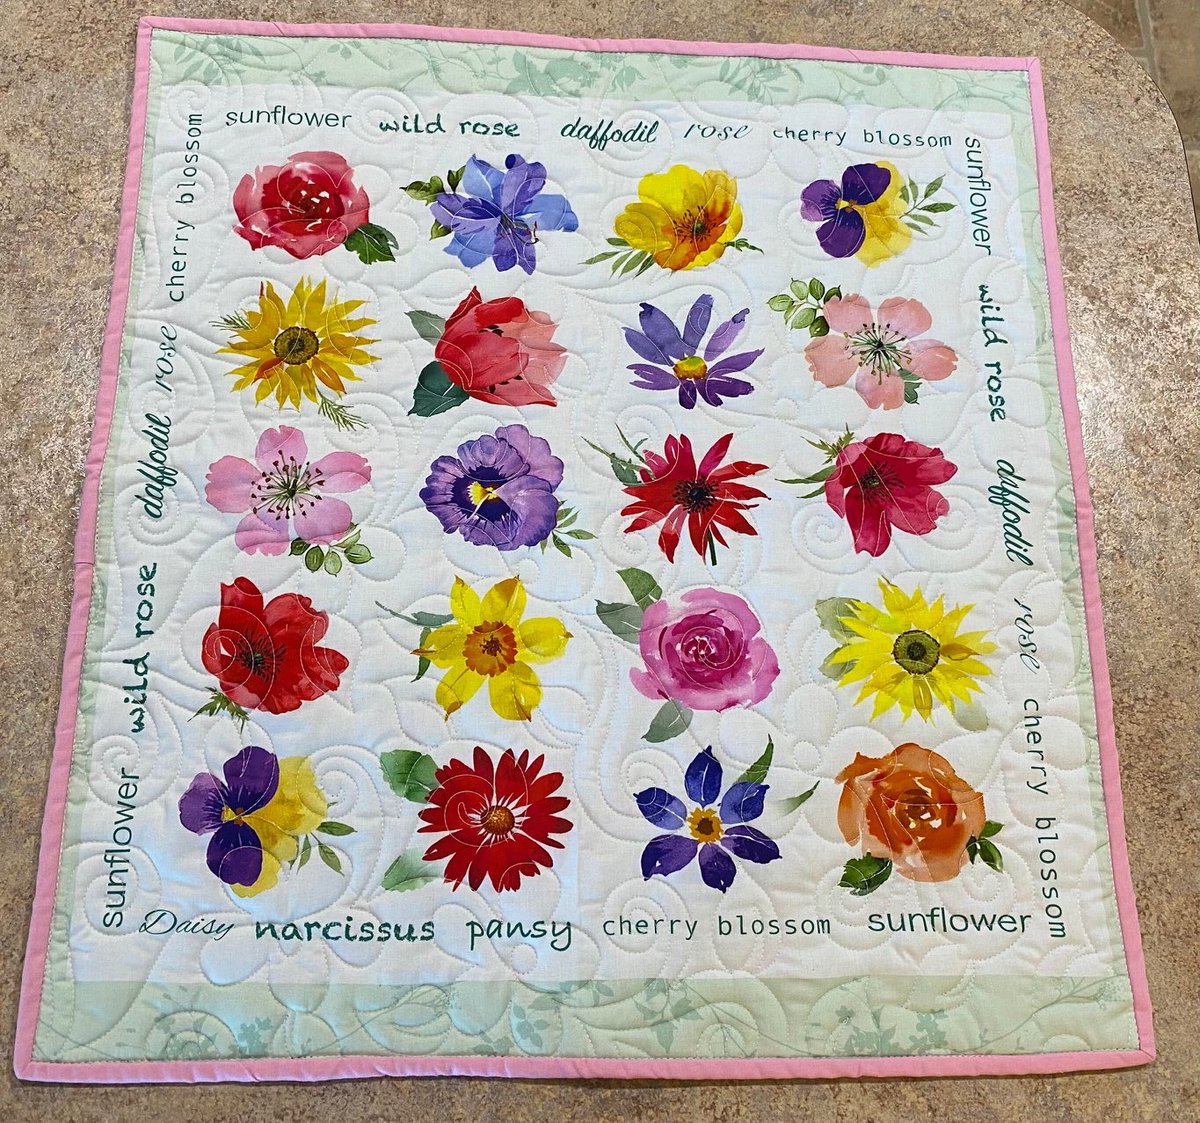 Who else is ready for Spring?  Floral Tabletopper. foreverhomequilts.etsy.com/listing/128681… 🌸🌺🌹🪻🌼🌻 #etsy #spring #flowers #decor #home #table